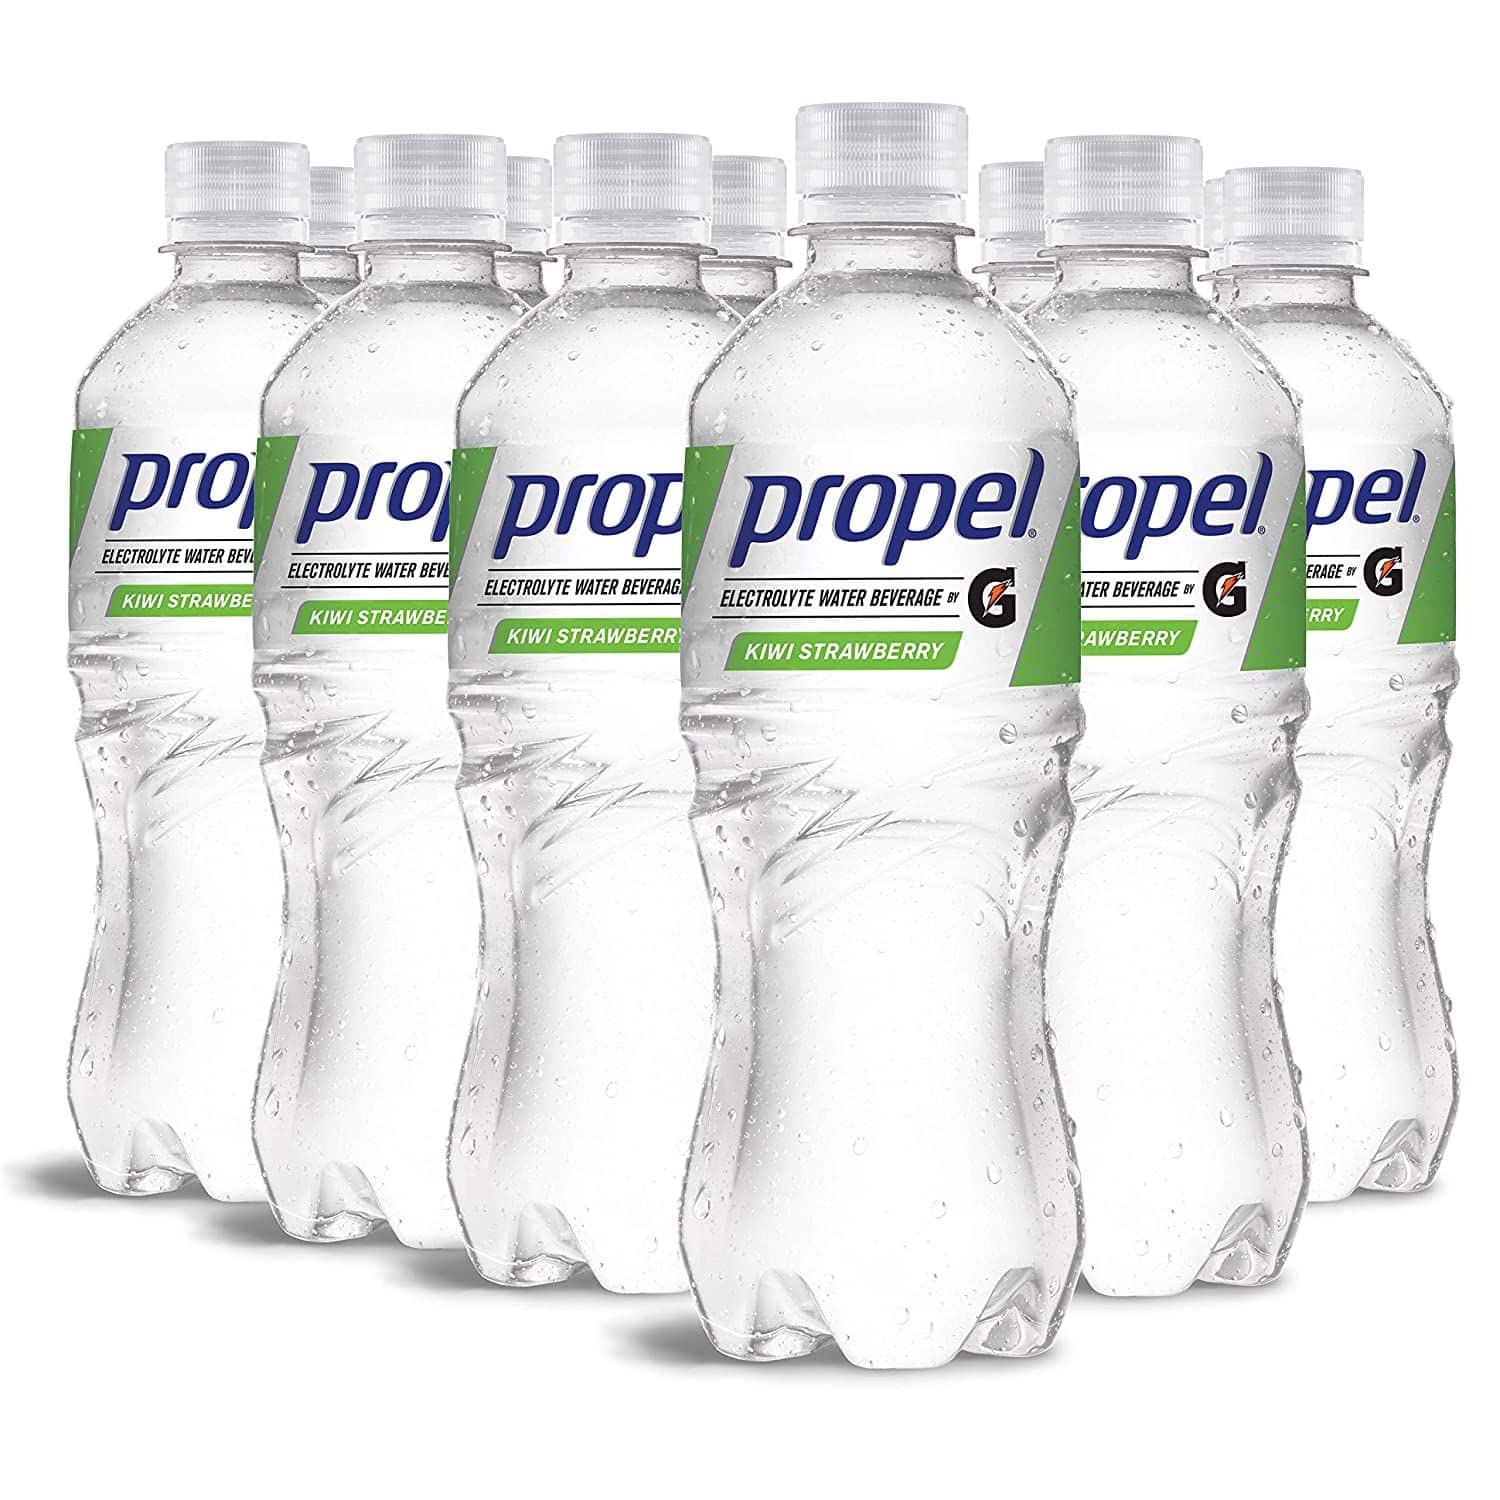 How Bad Is Propel Water For You